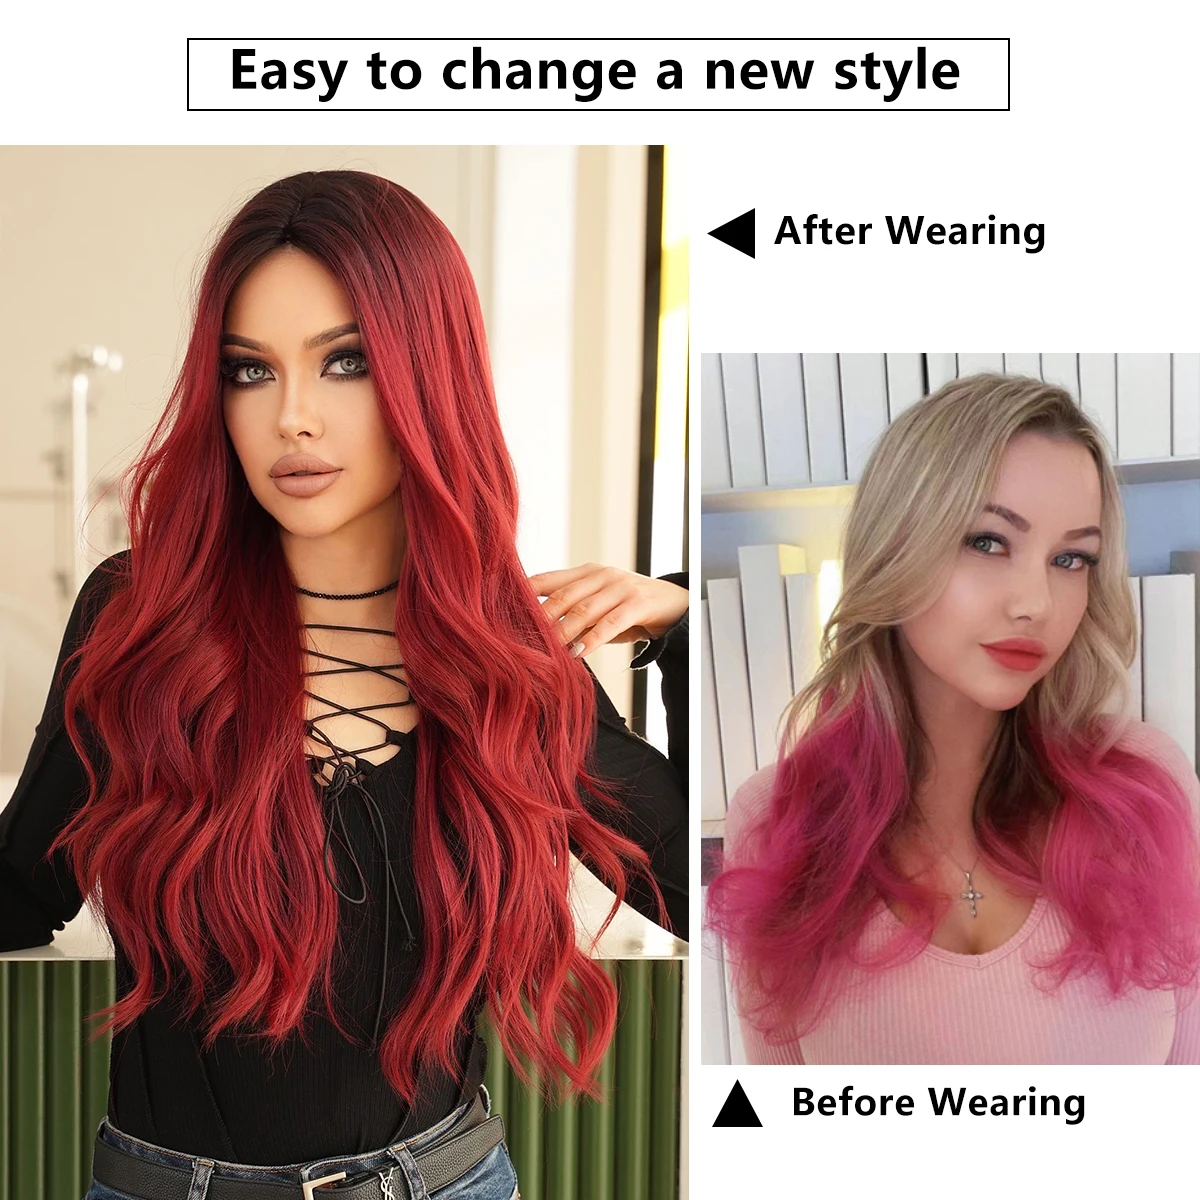 NAMM Long Loose Water Wave Wine Red Wigs with Dark Roots High Quality Synthetic Layered Middle Part DarkRed Hair Wig for Women